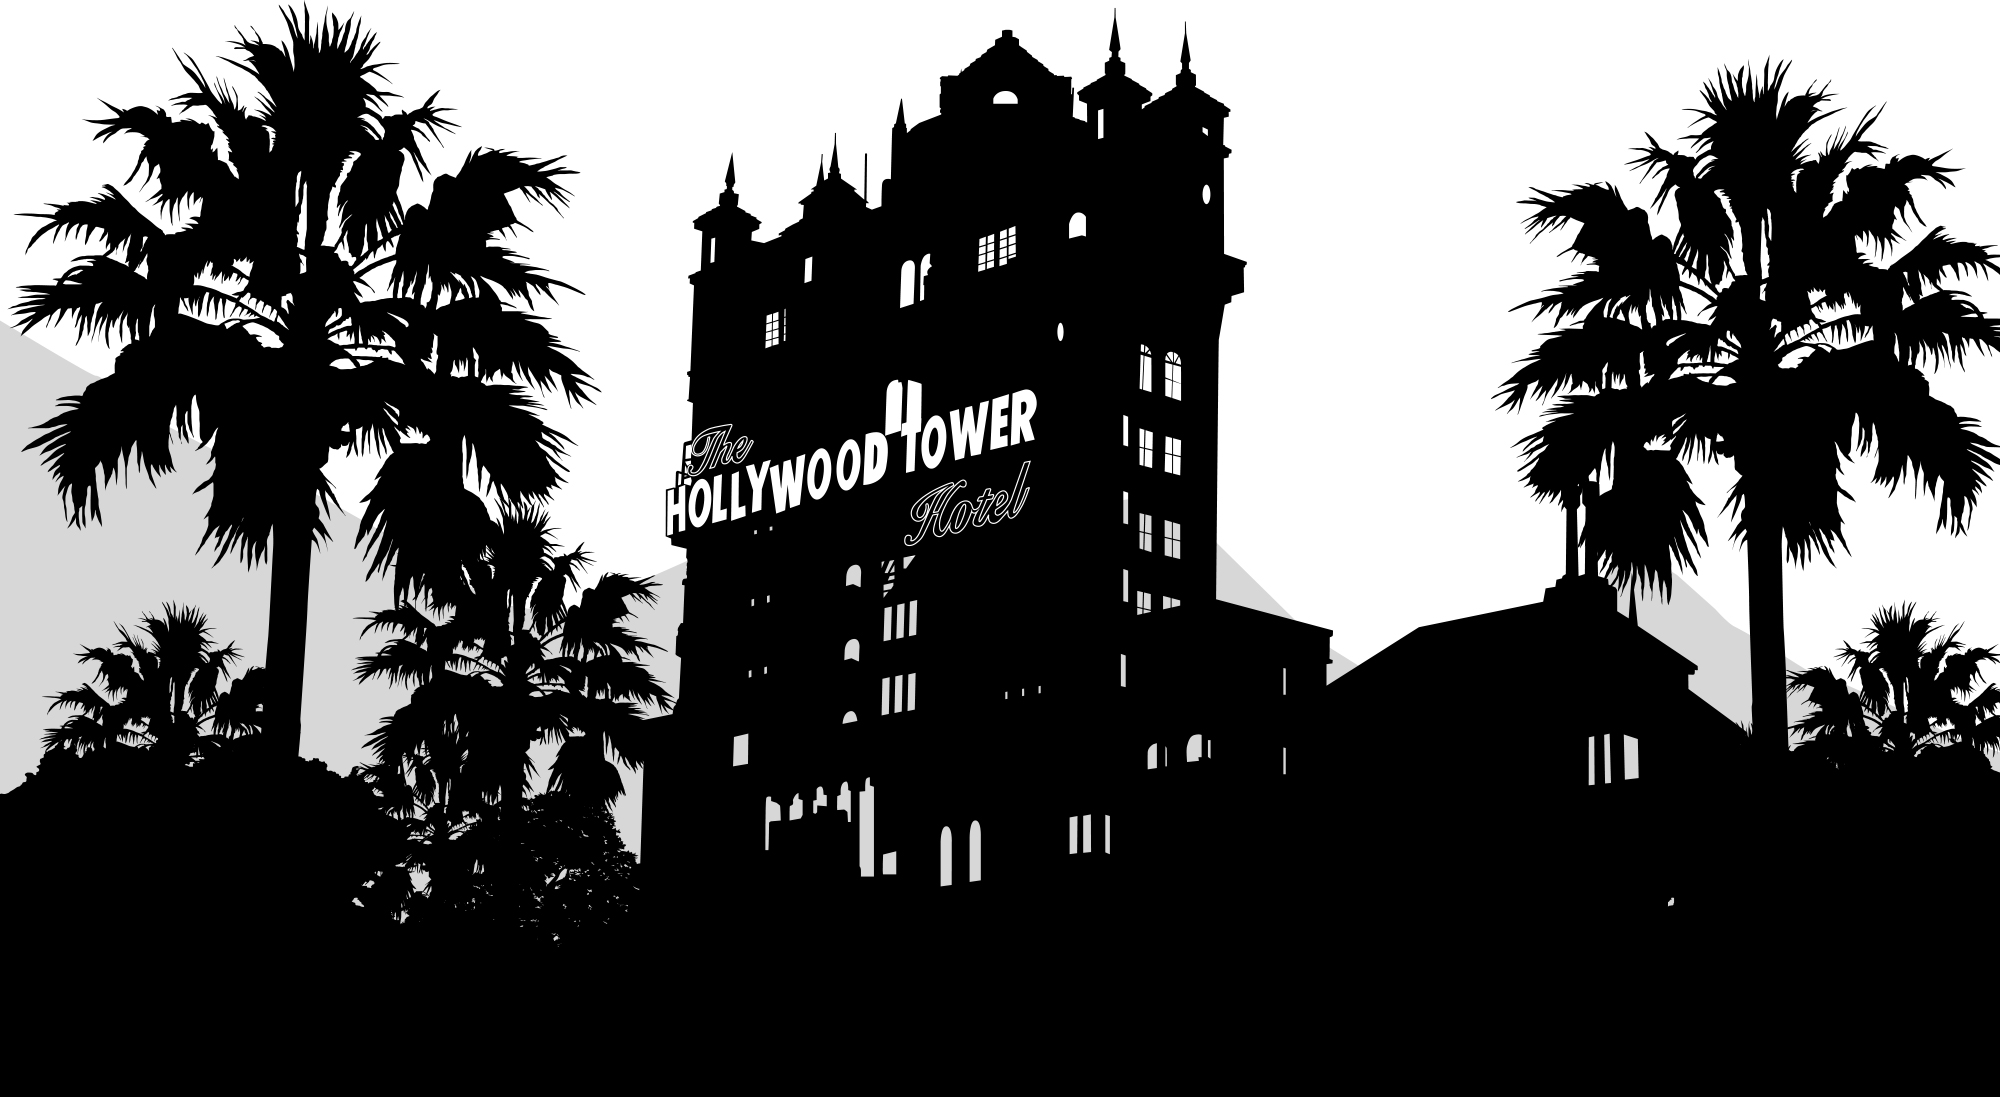 DISNEY_PARKS-_CUT_OUT_TOWER_OF_TERROR_REF